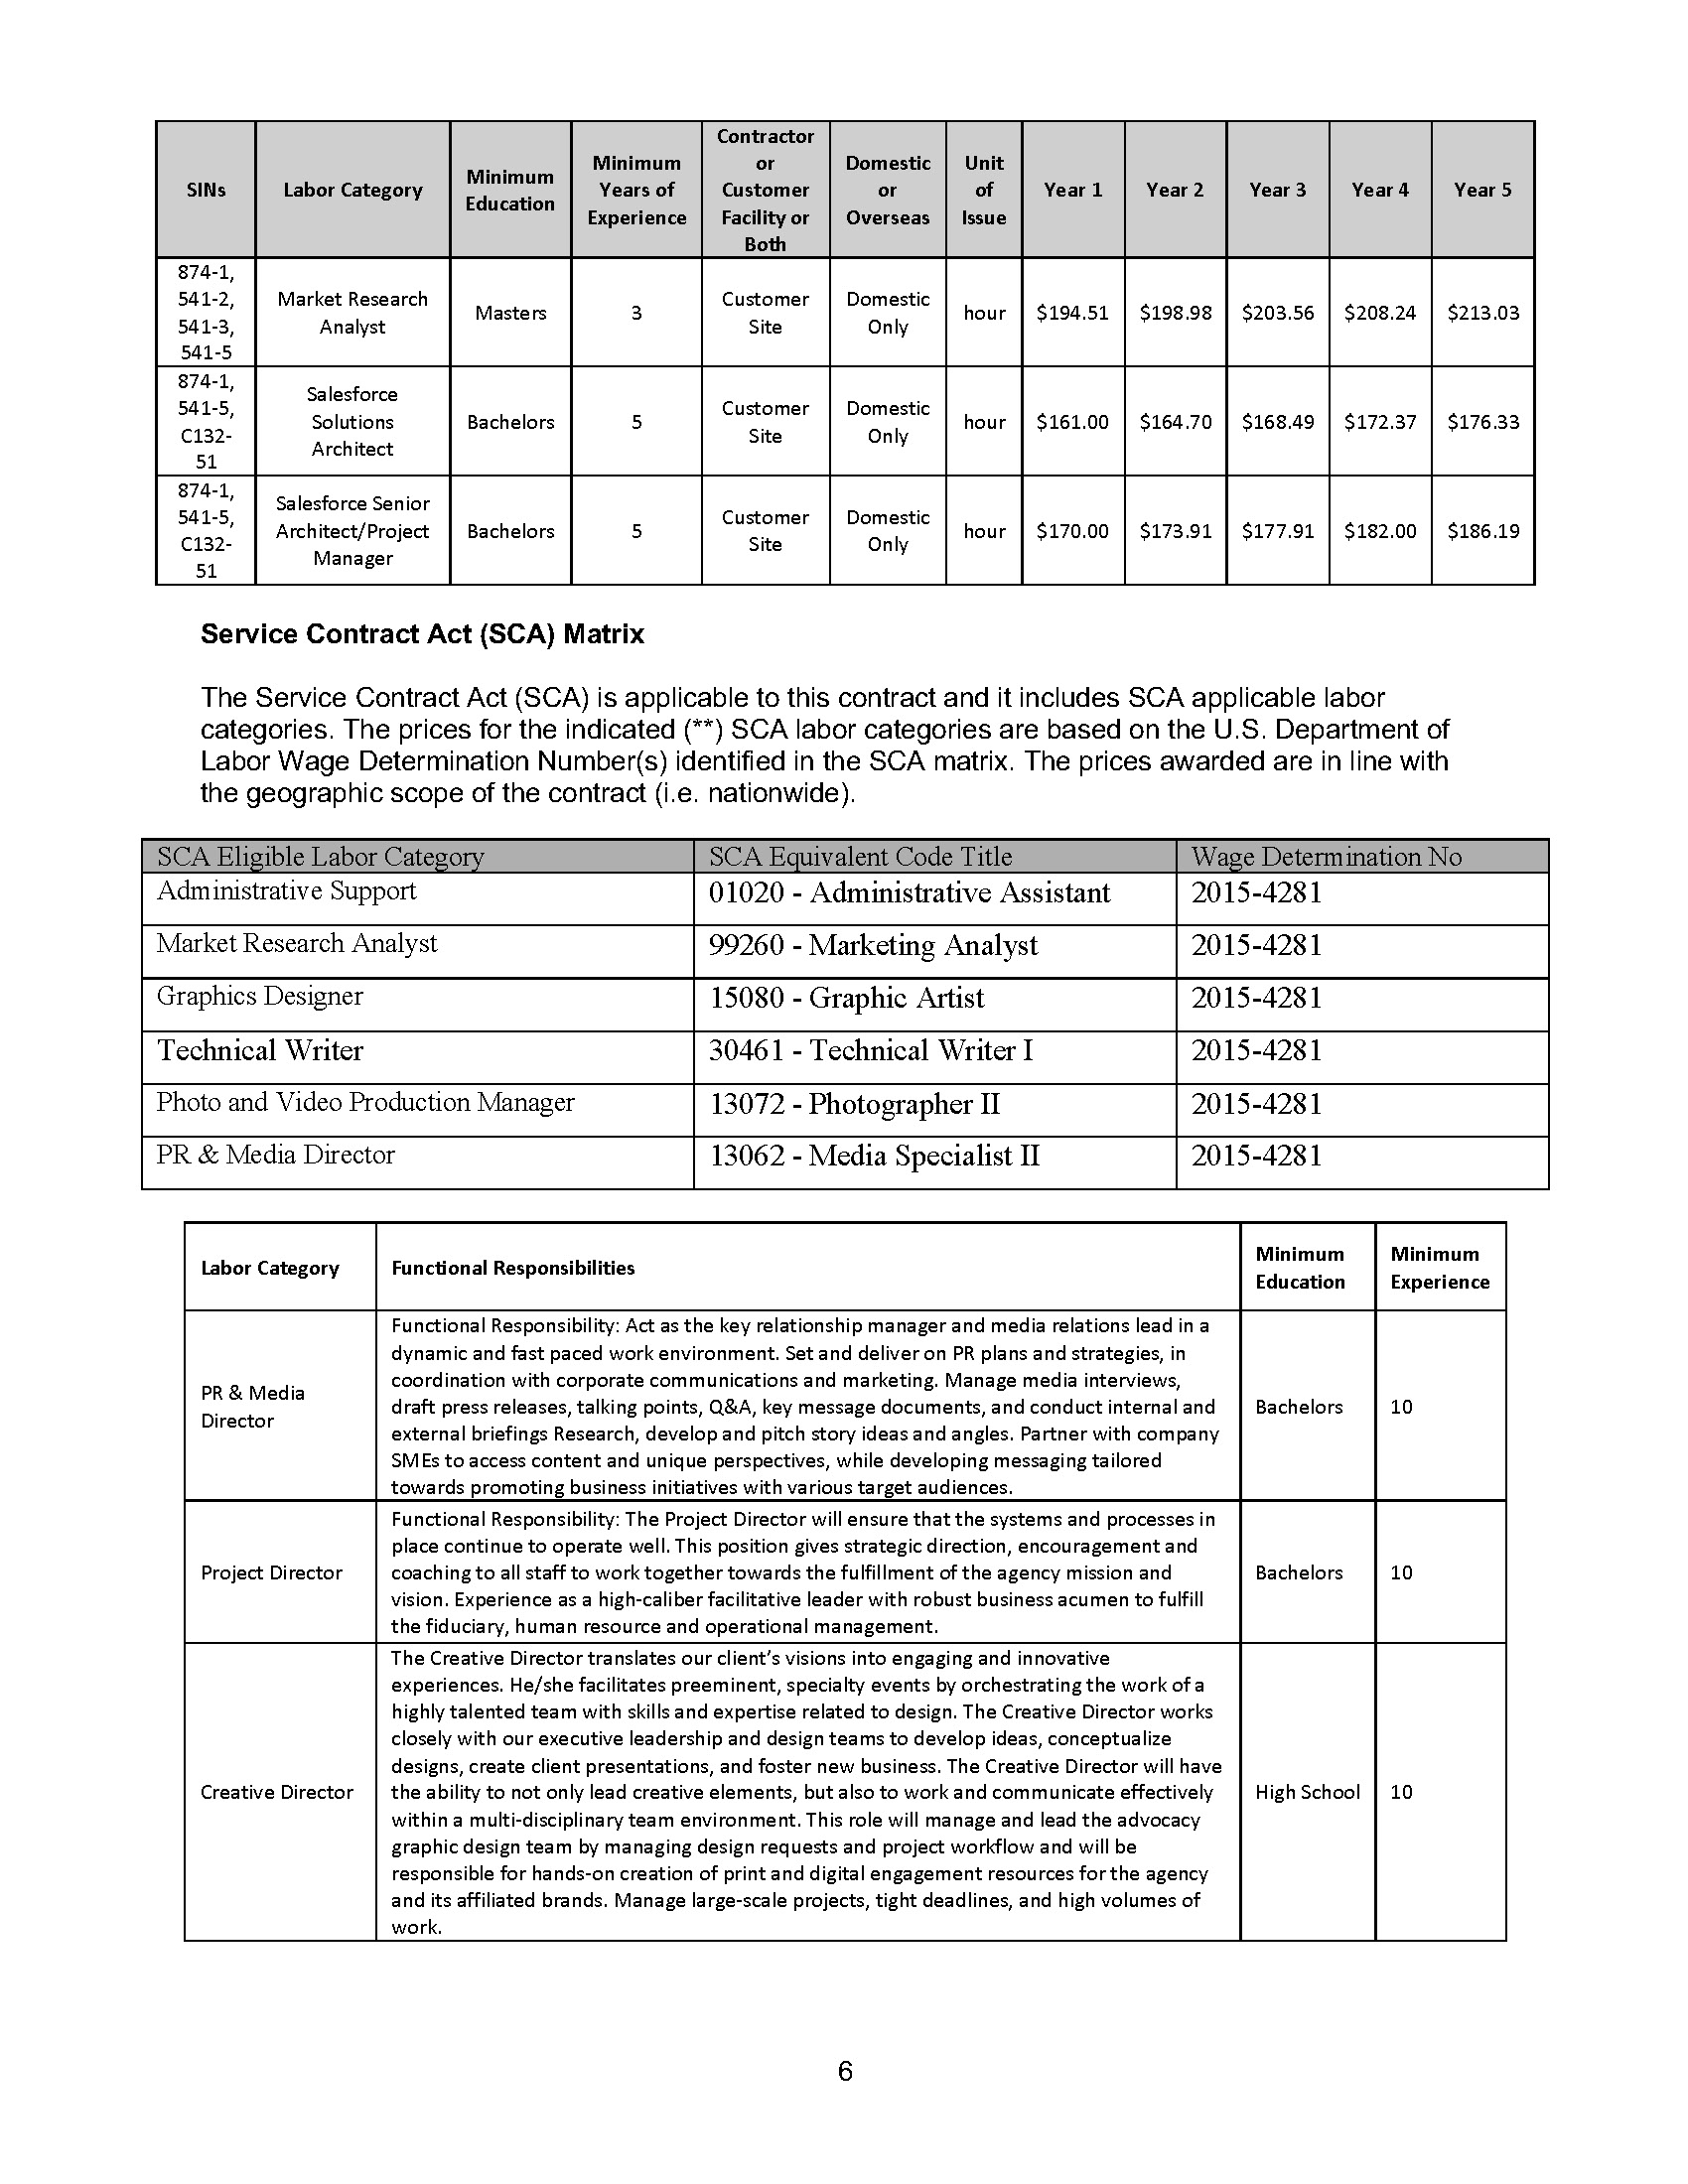 Kaptivate LLC_Authorized Federal Supply Schedule Price List_Page_06